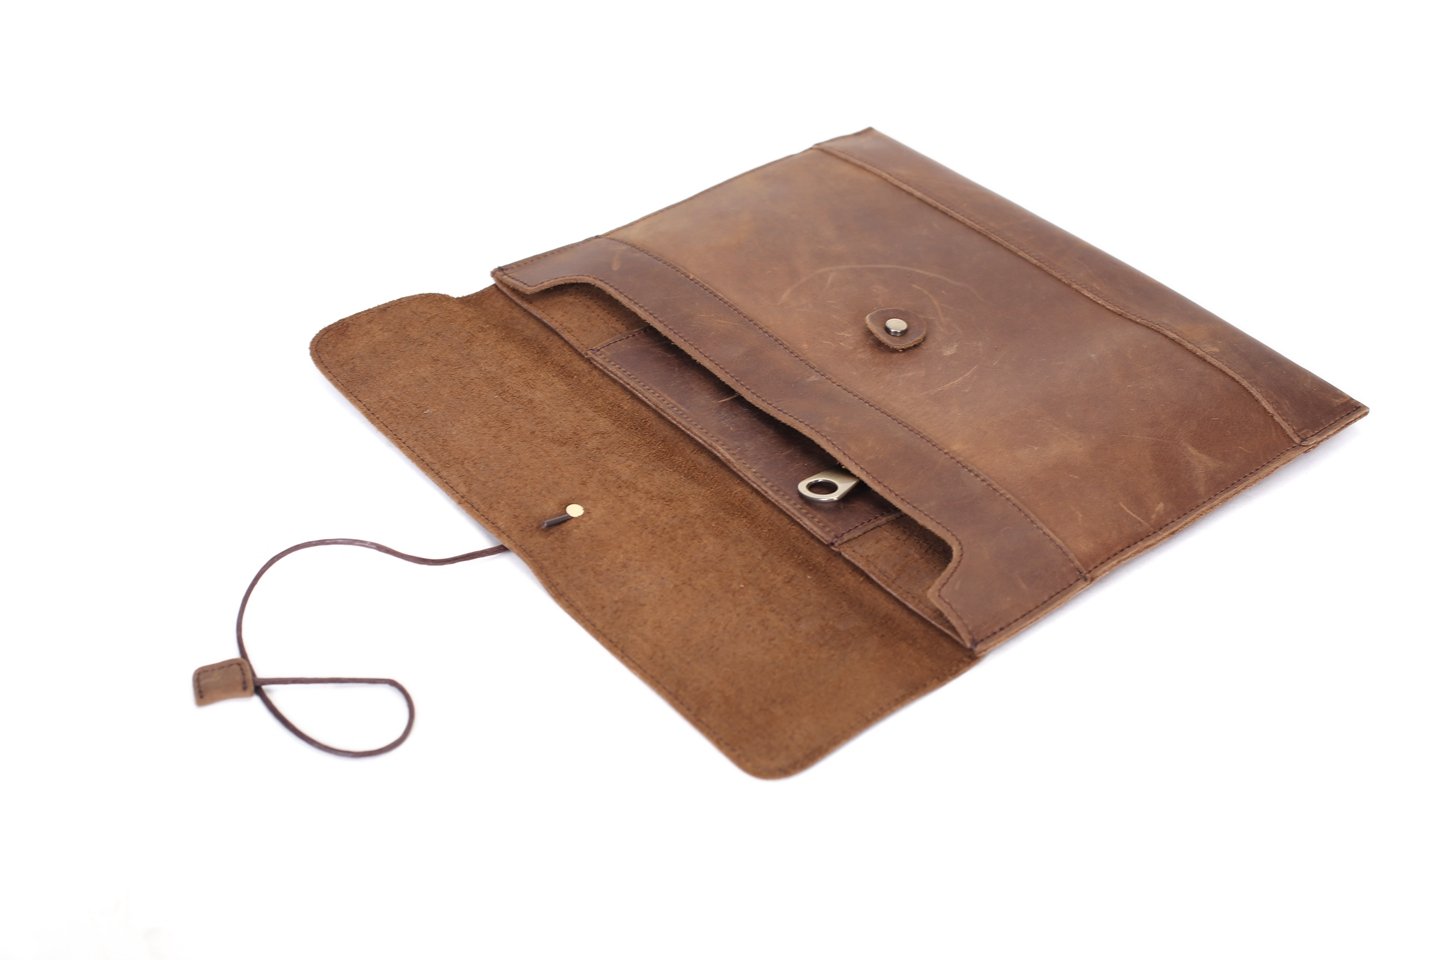 Envelope Clutch Purses $12.95 Shipped - See Mom Click